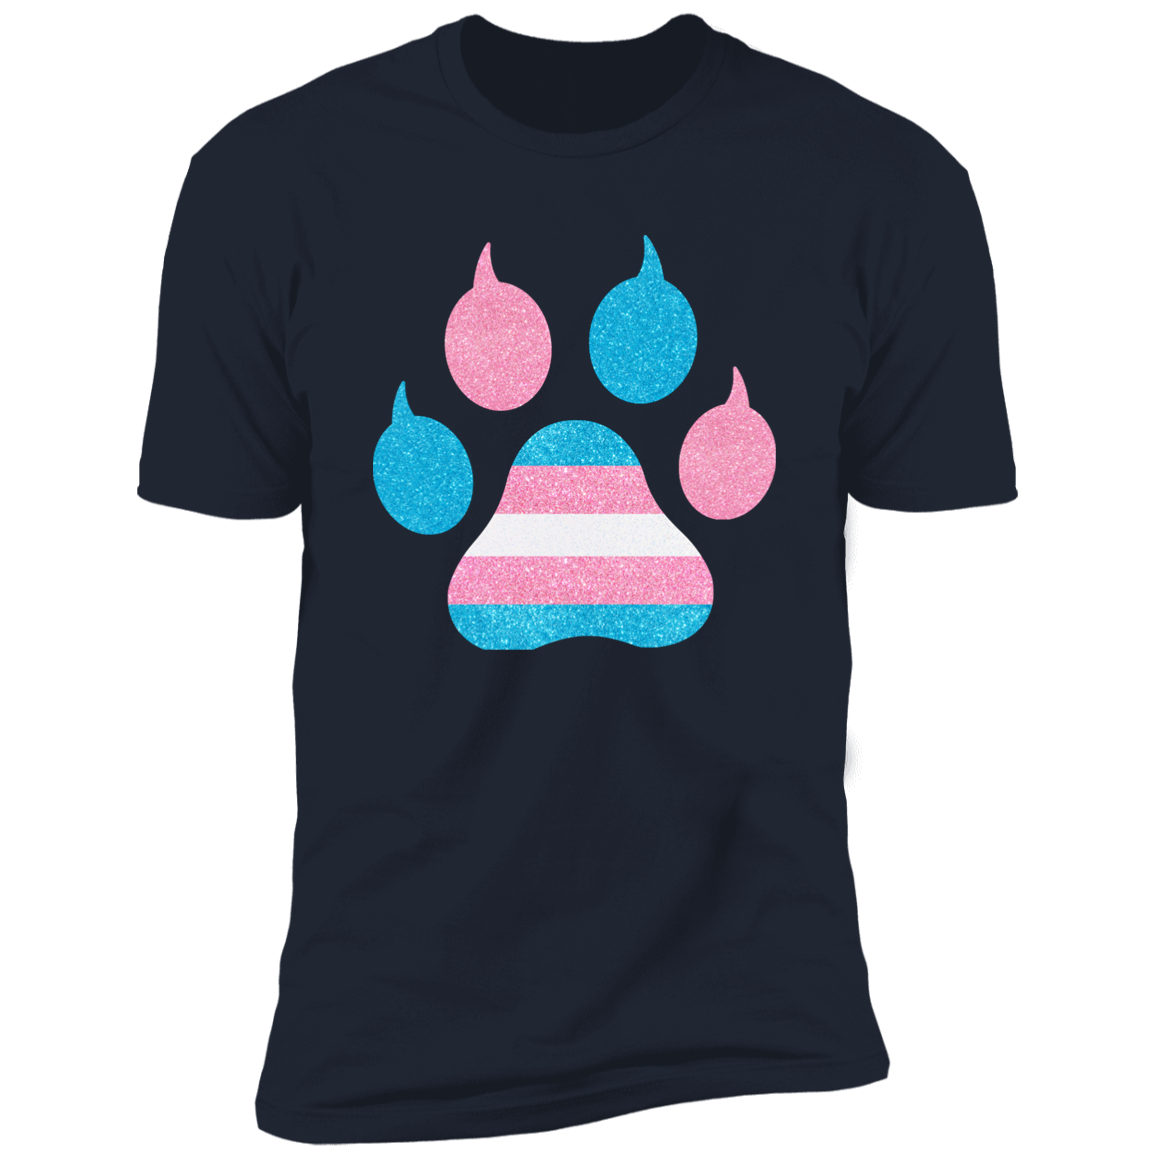 Trans Pride Cat Paw trans pride t-shirt,  trans cat paw pride shirt for humans, in navy blue